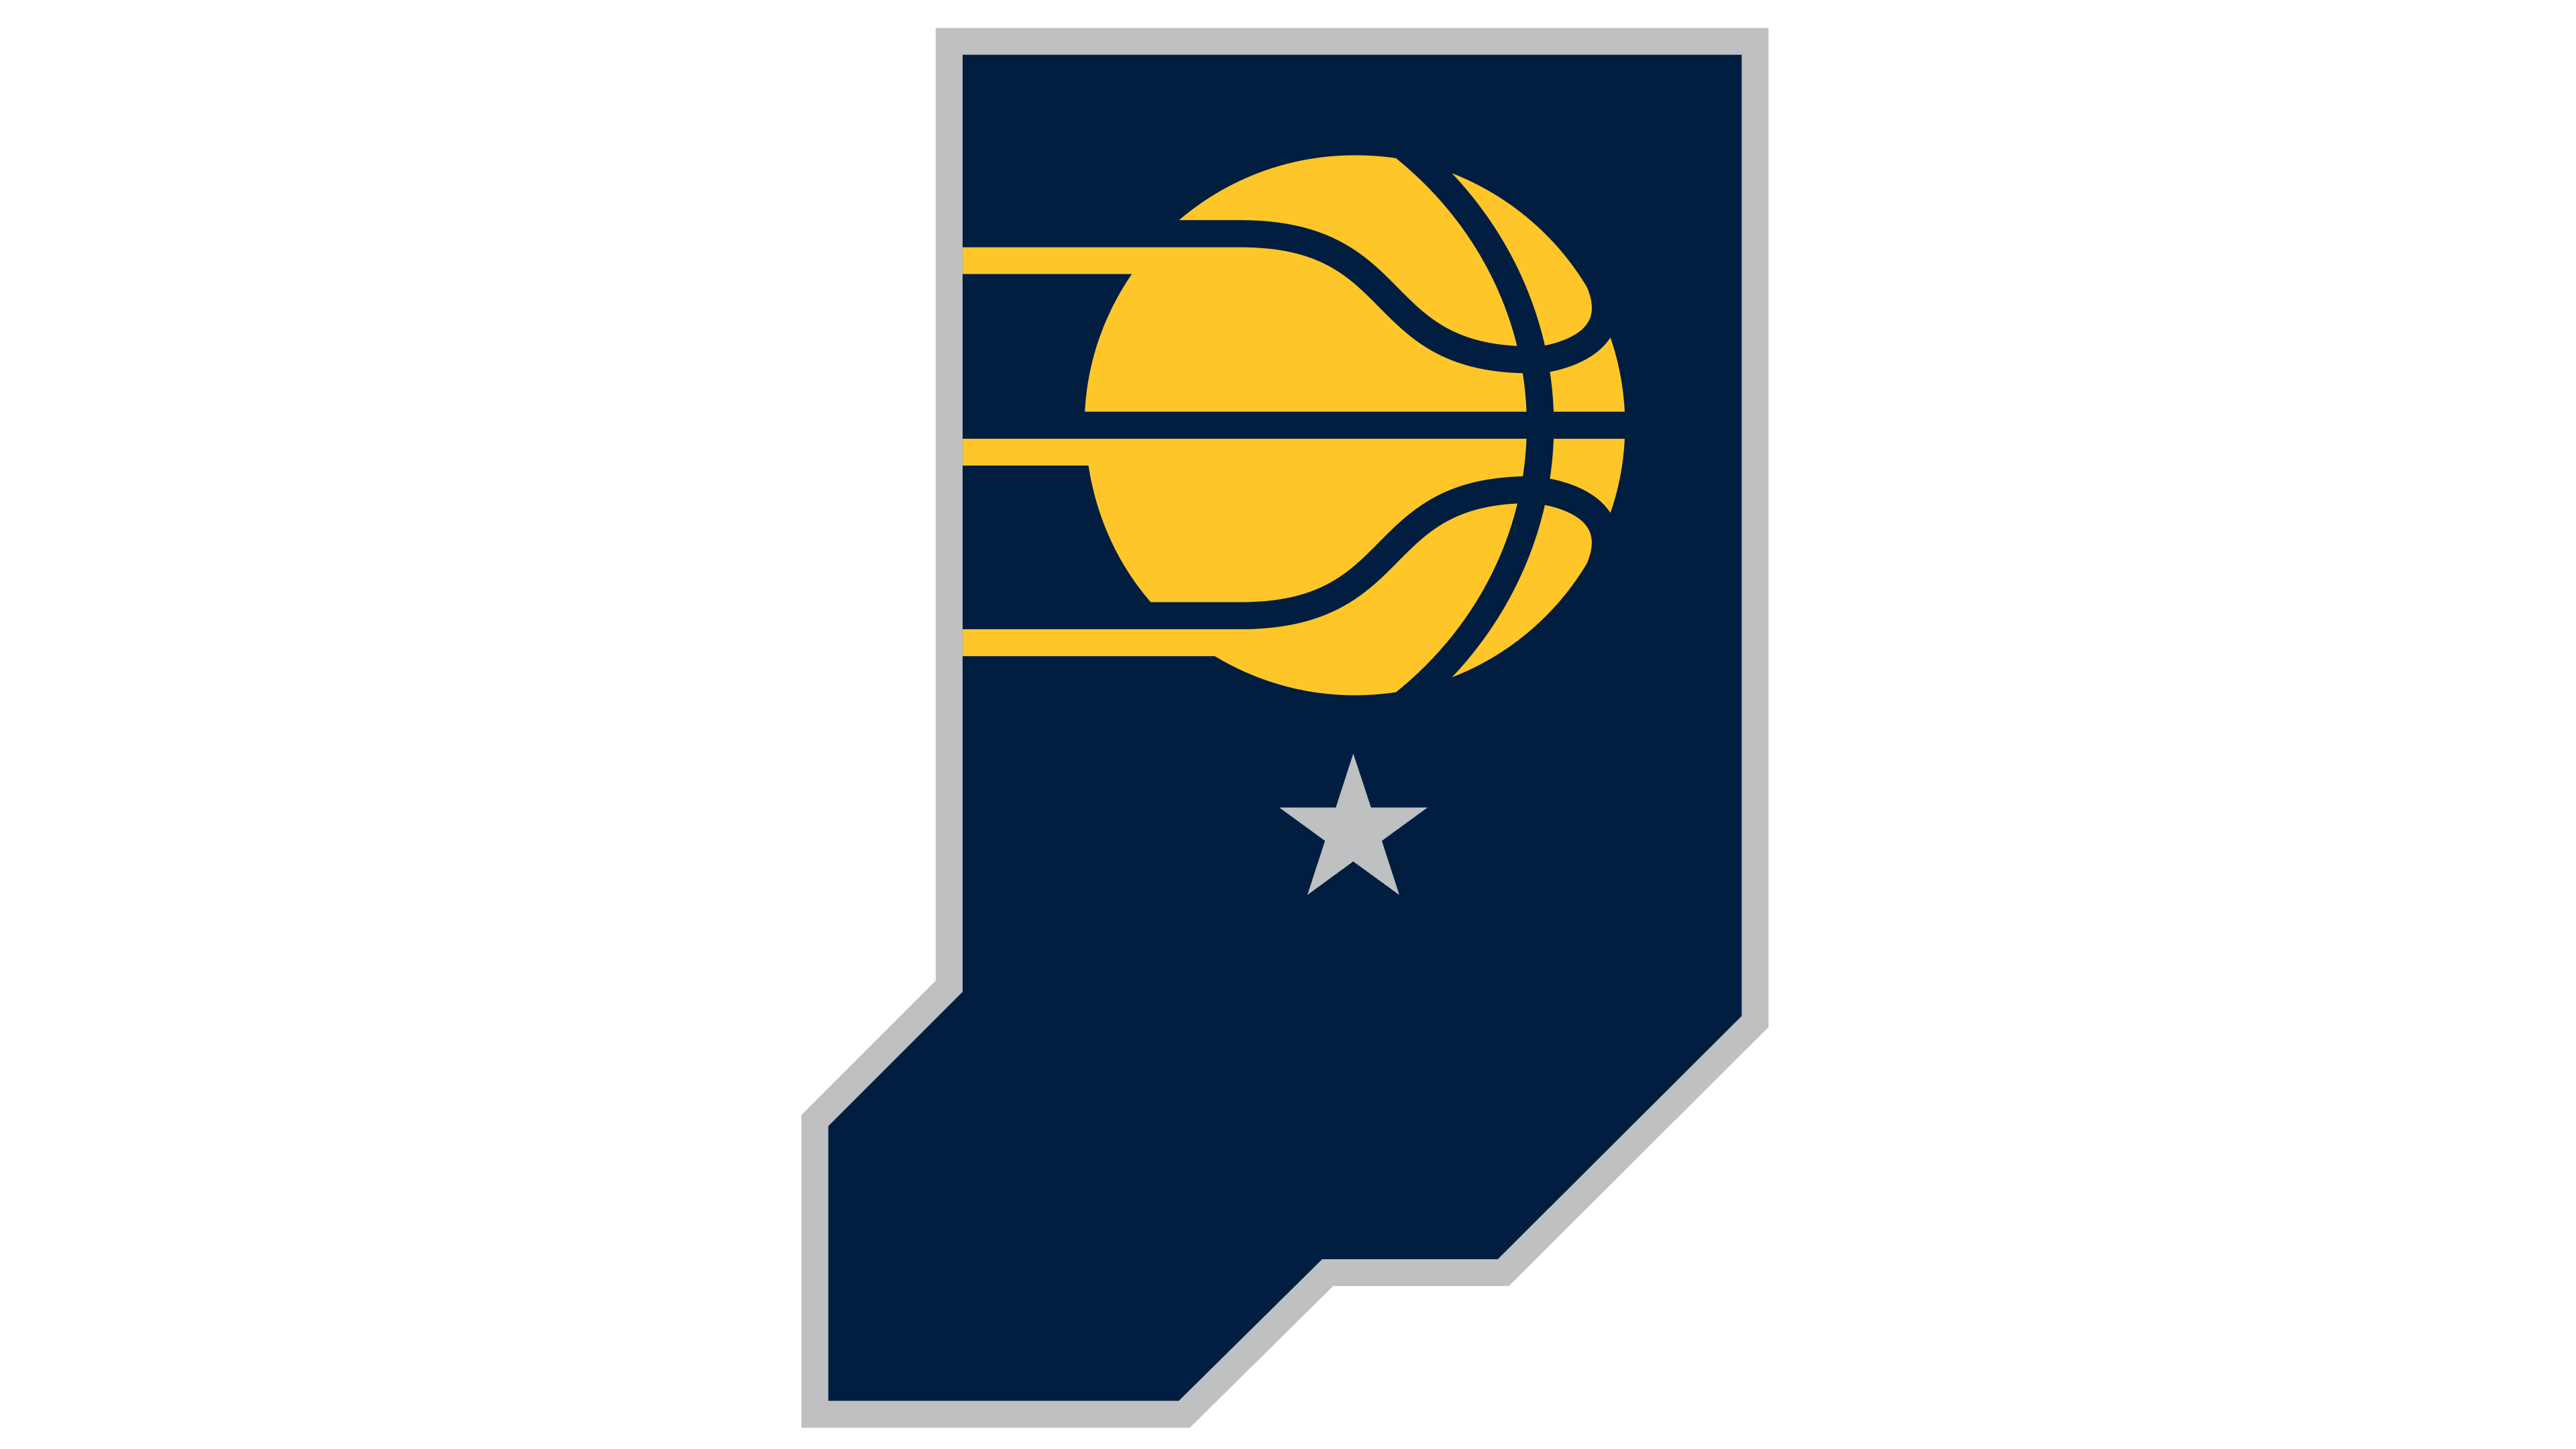 Indiana Pacers scores